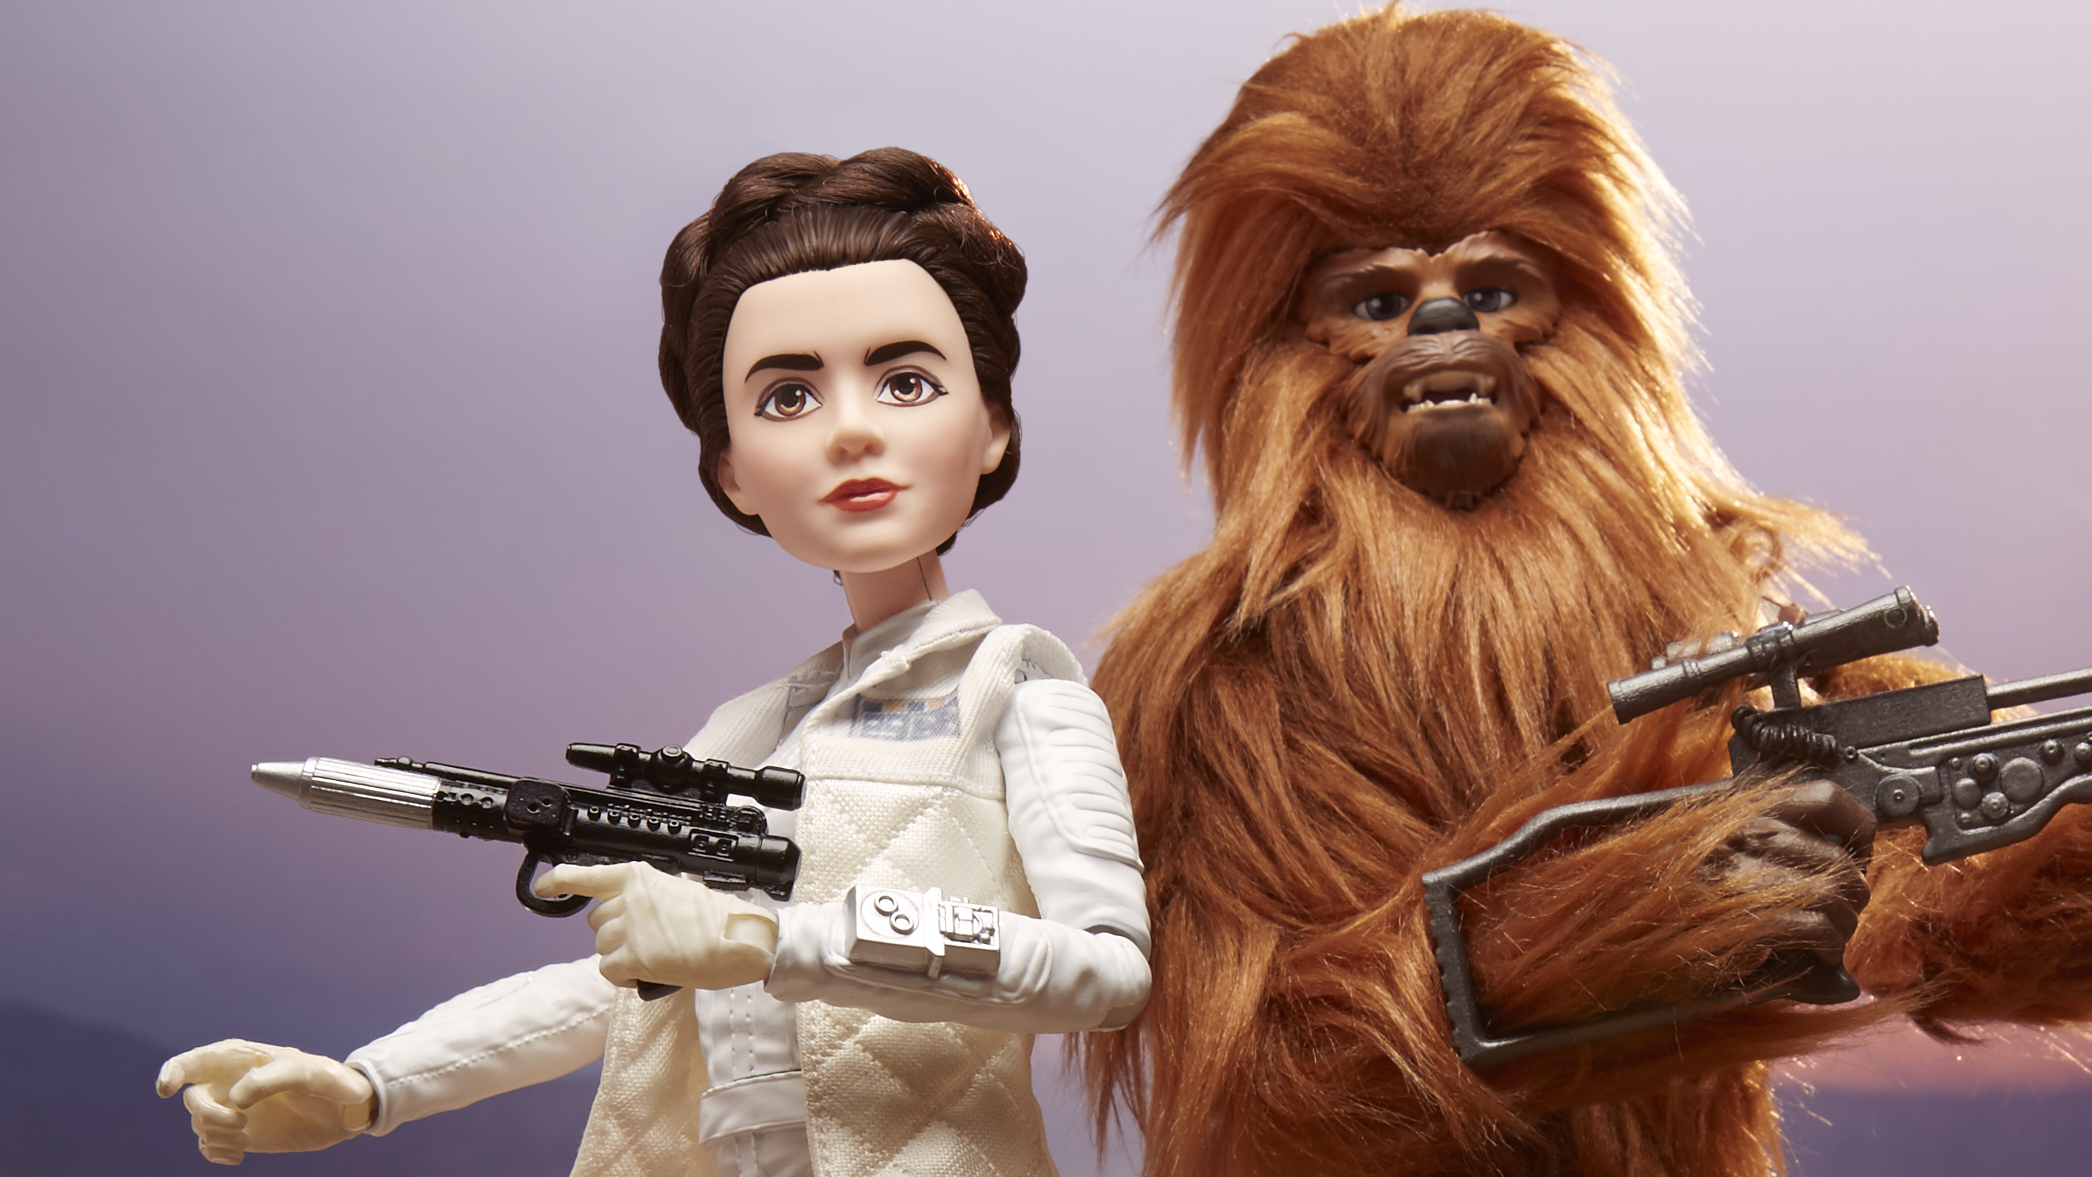 Look At These Star Wars: Forces Of Destiny Dolls